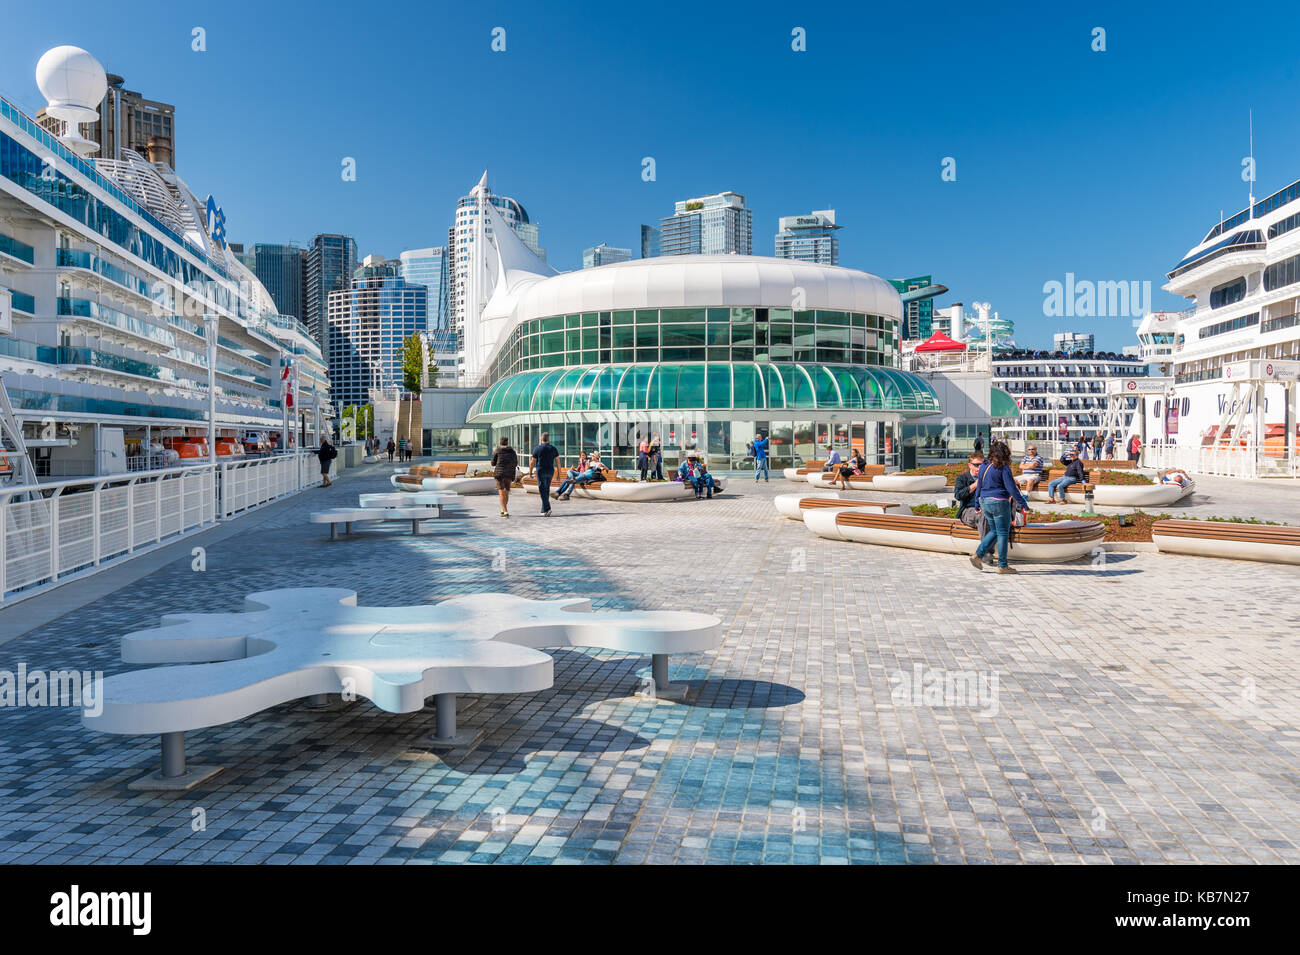 Vancouver, British Columbia, Canada - 13 September 2017: Canada Place in Summer with two cruise ships docked Stock Photo